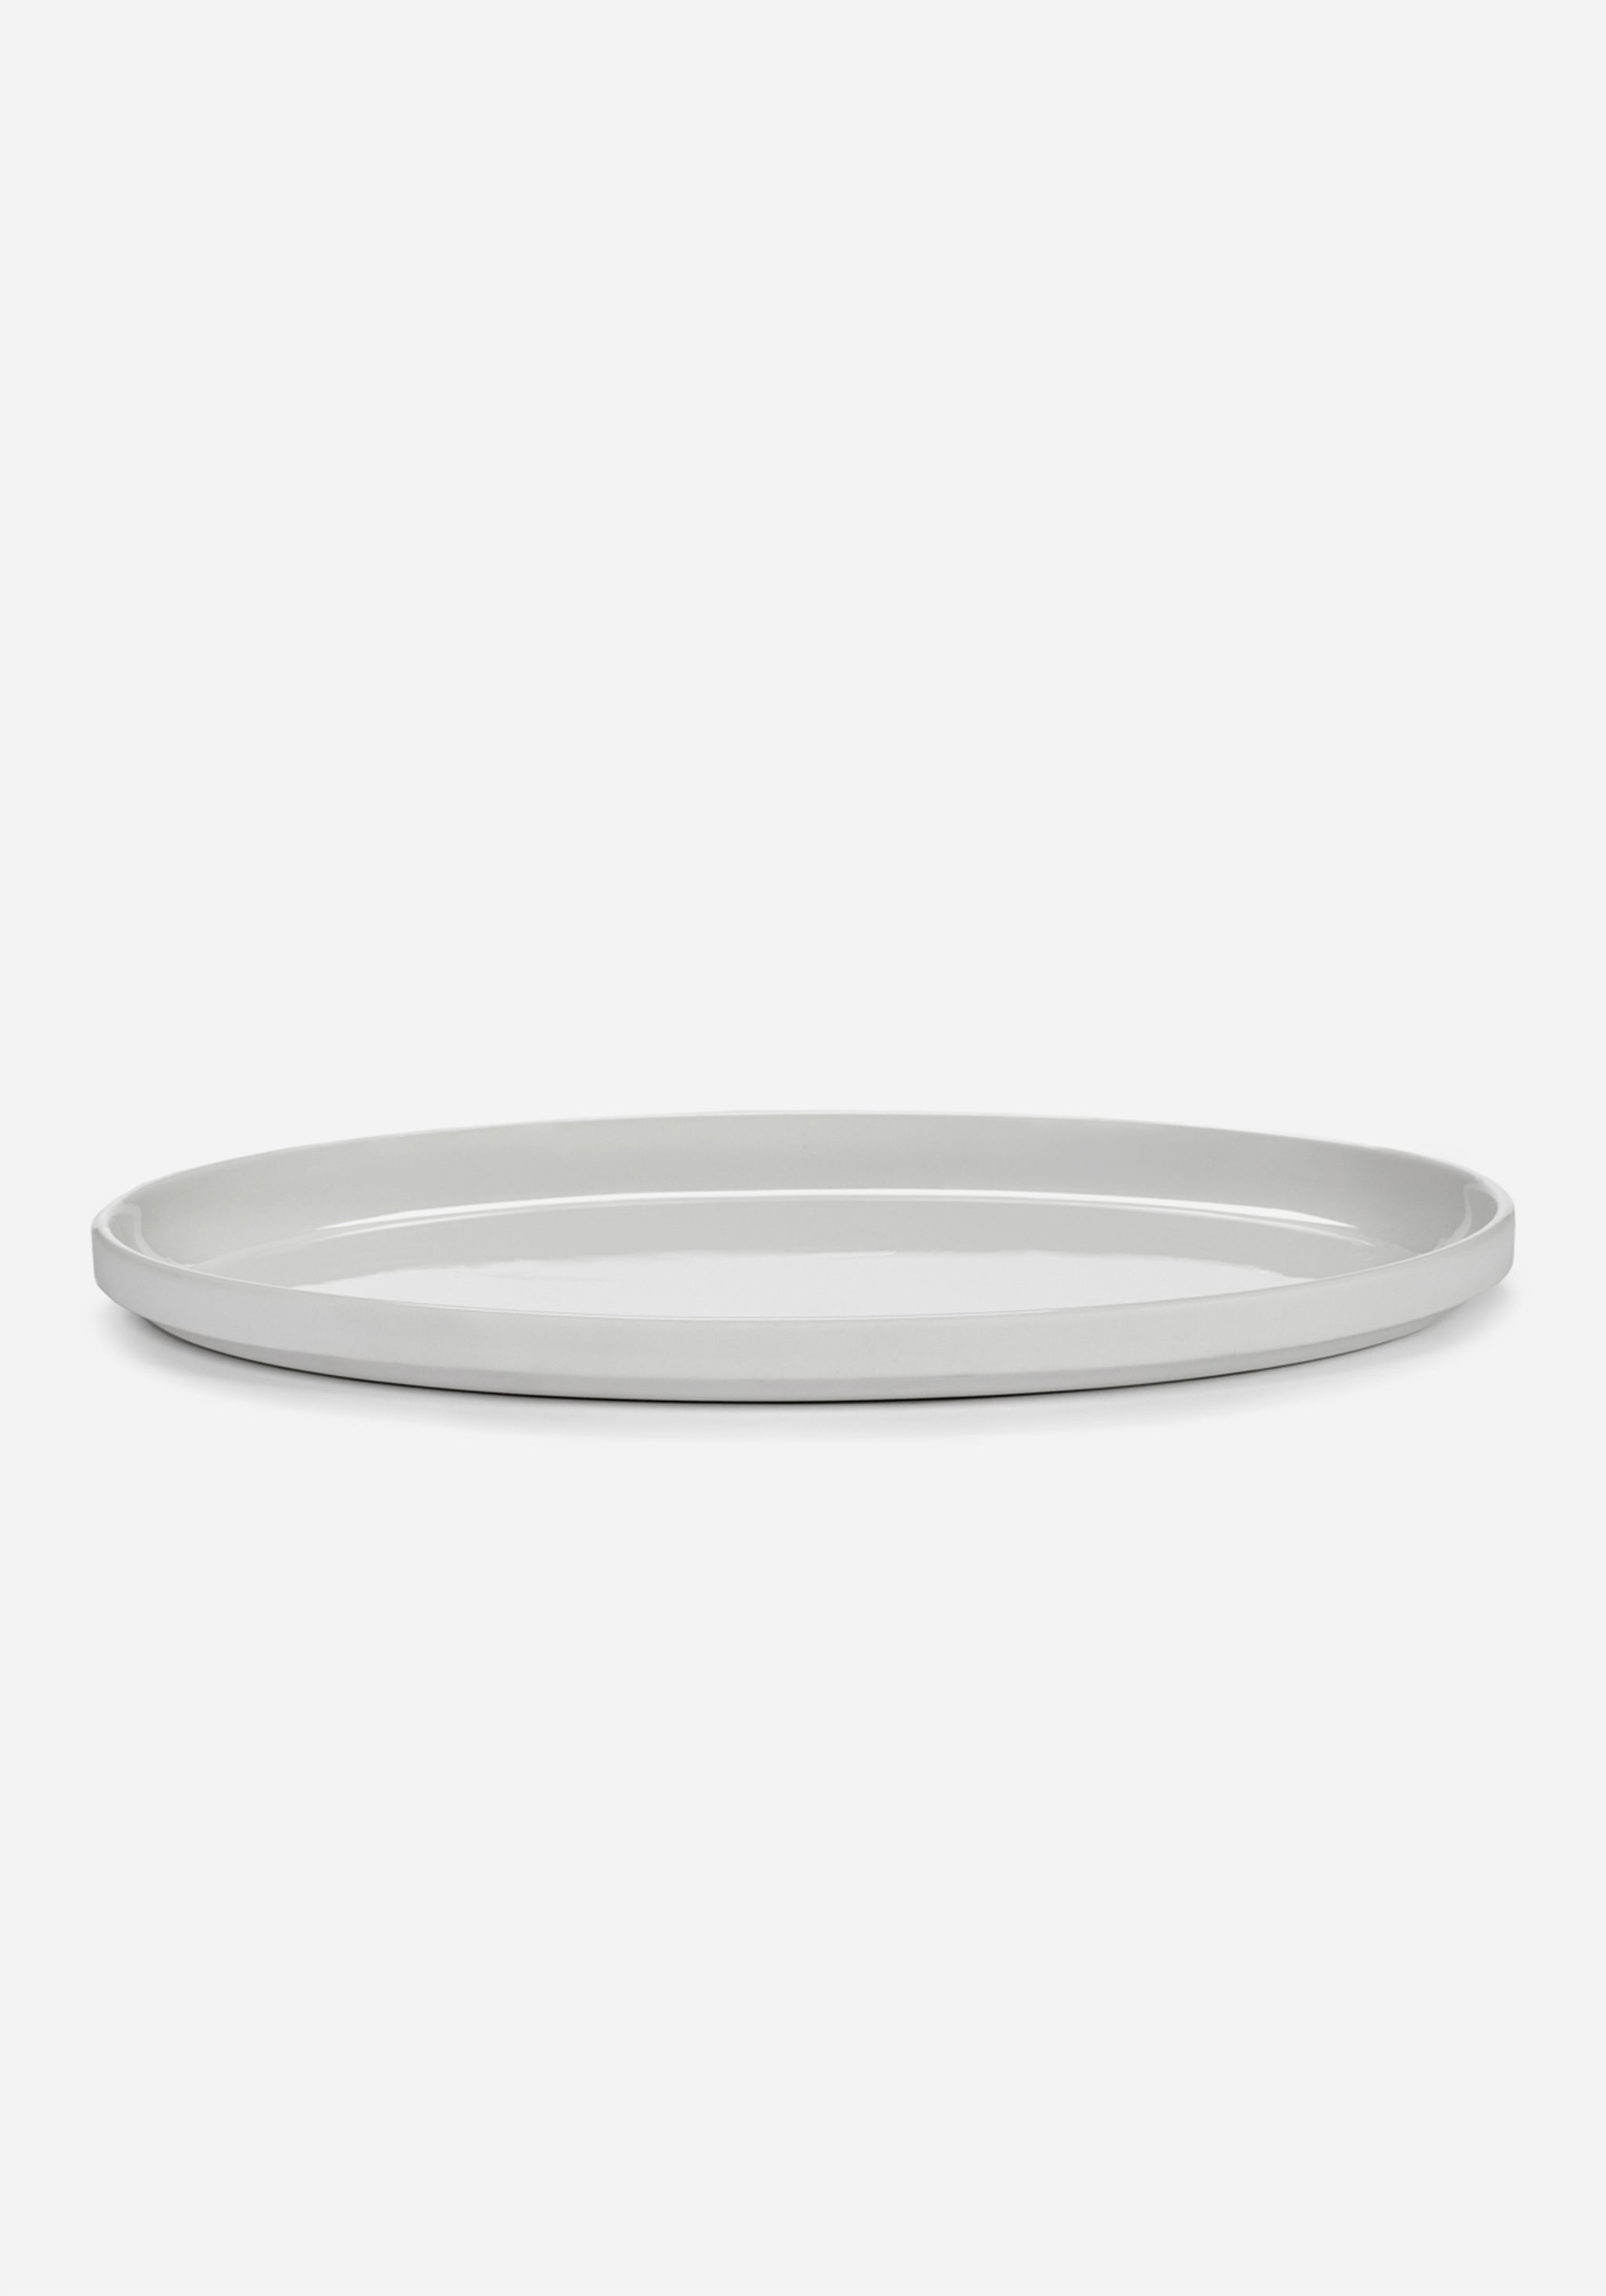 Matte Oval Plate - Large 33cm